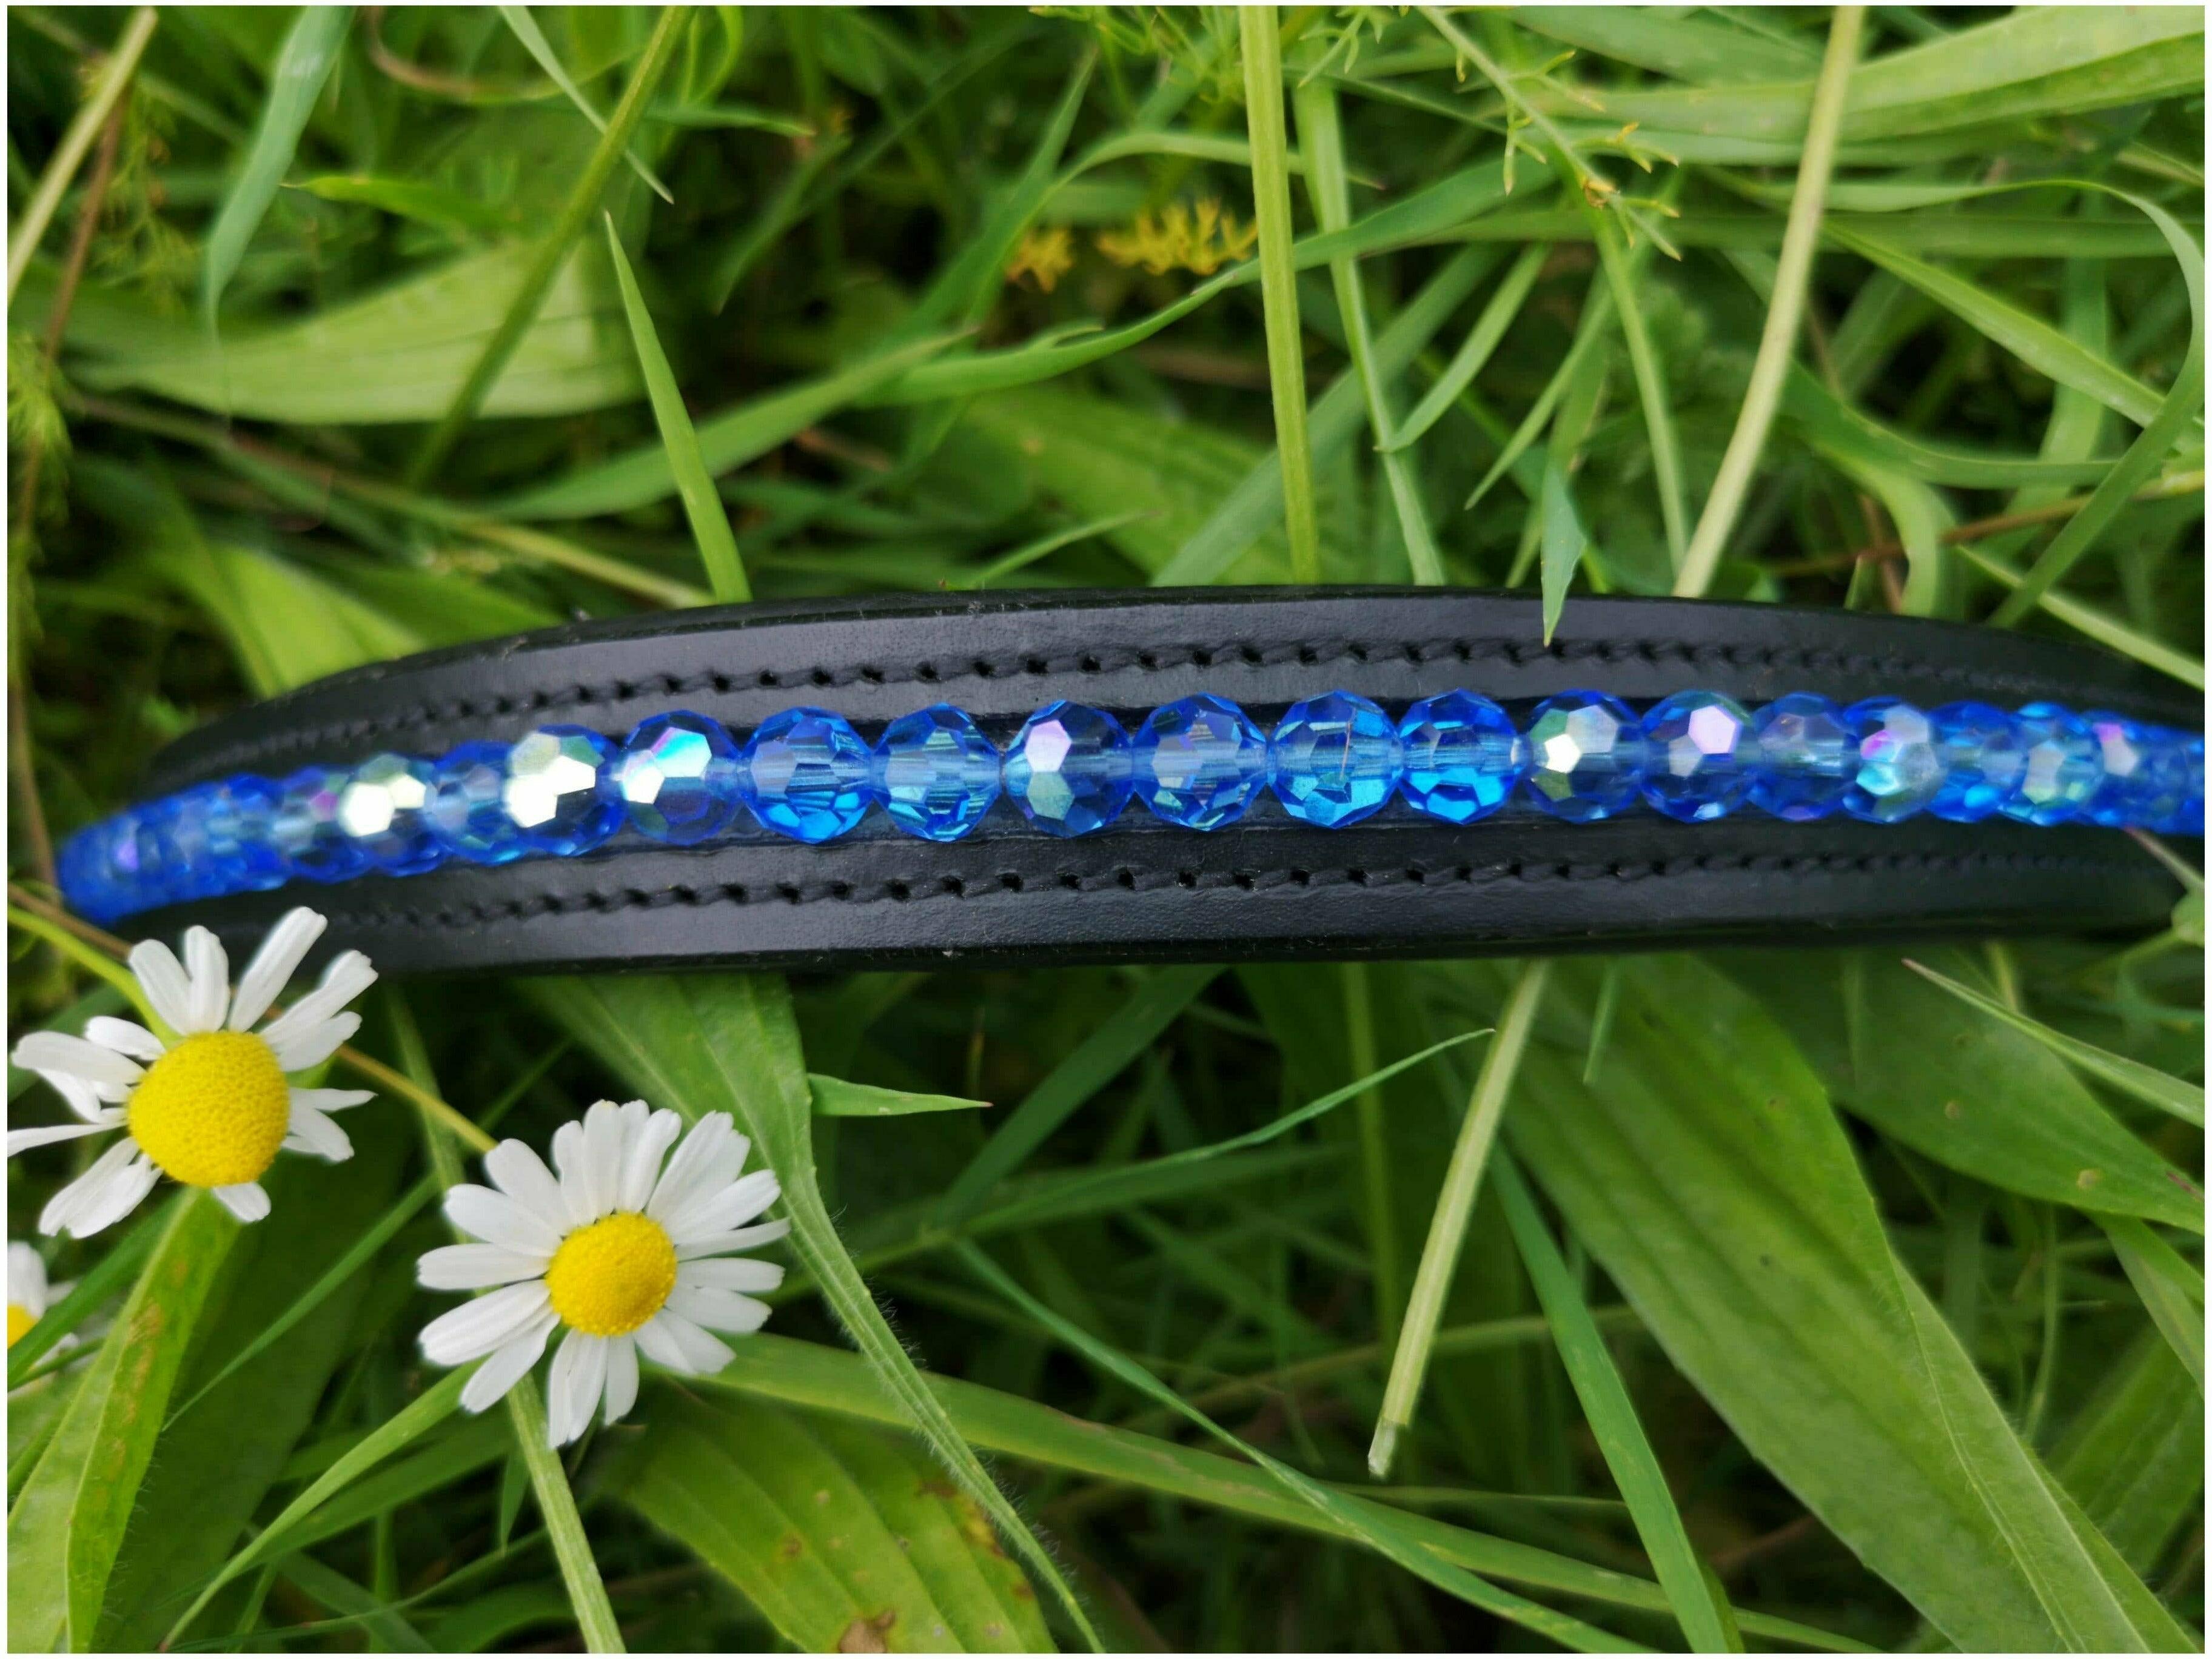 Amazing quality custom browband sitting on a bed of grass surrounded by daisy's